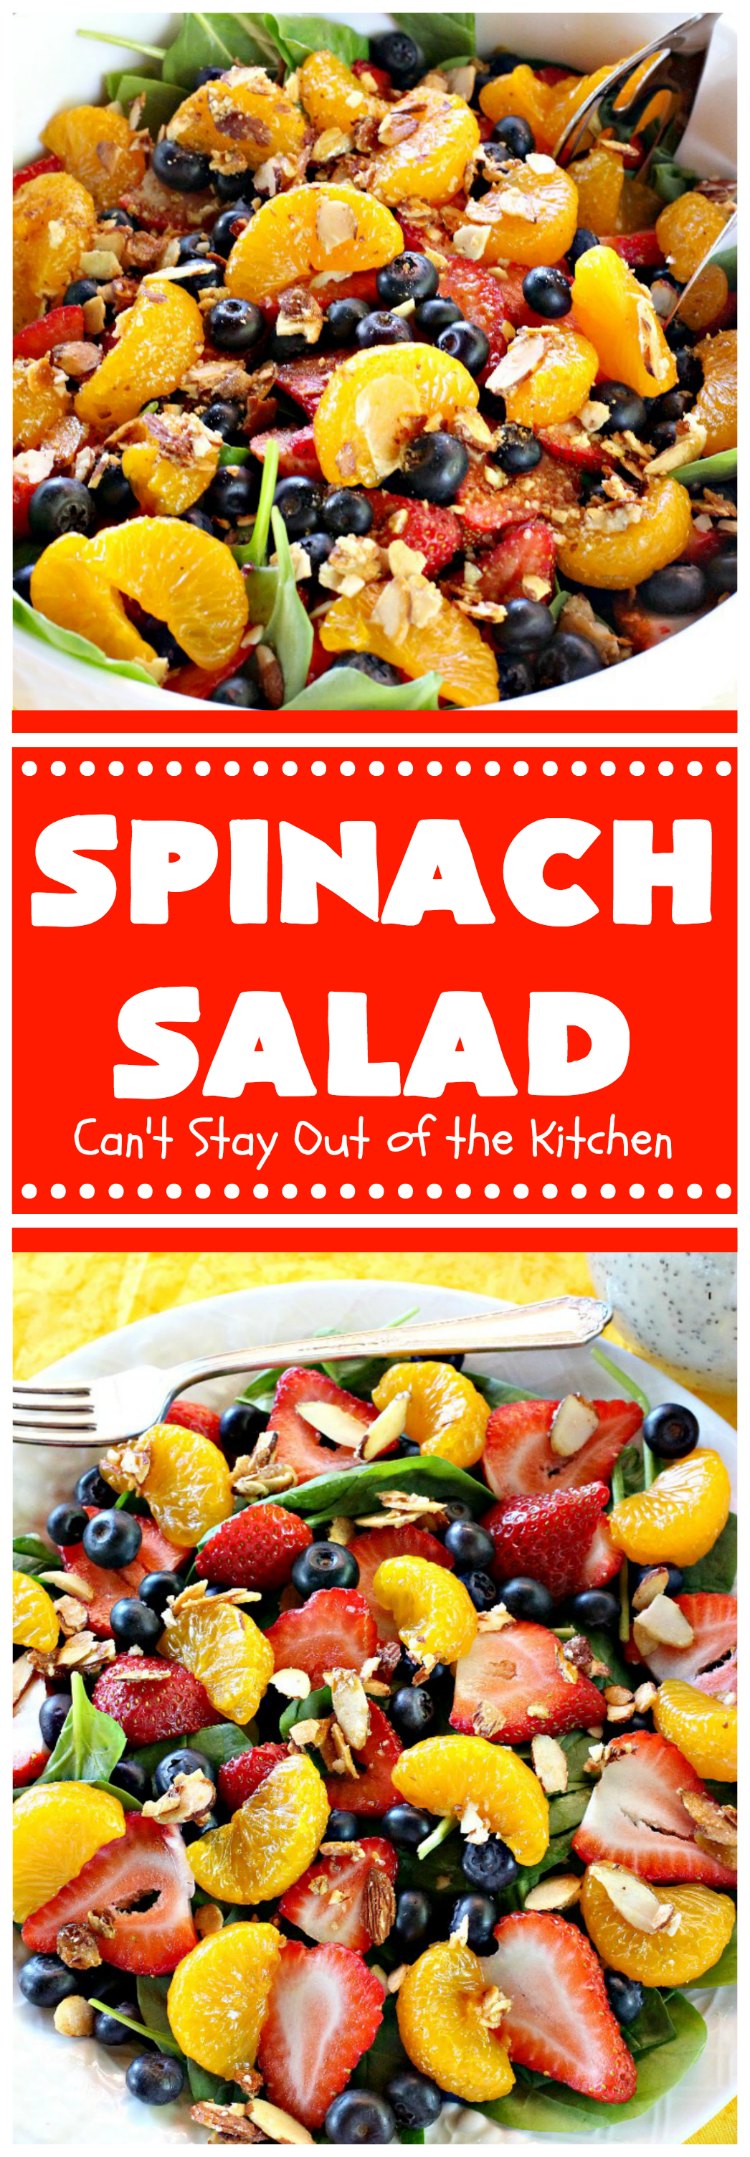 Spinach Salad | Can't Stay Out of the Kitchen